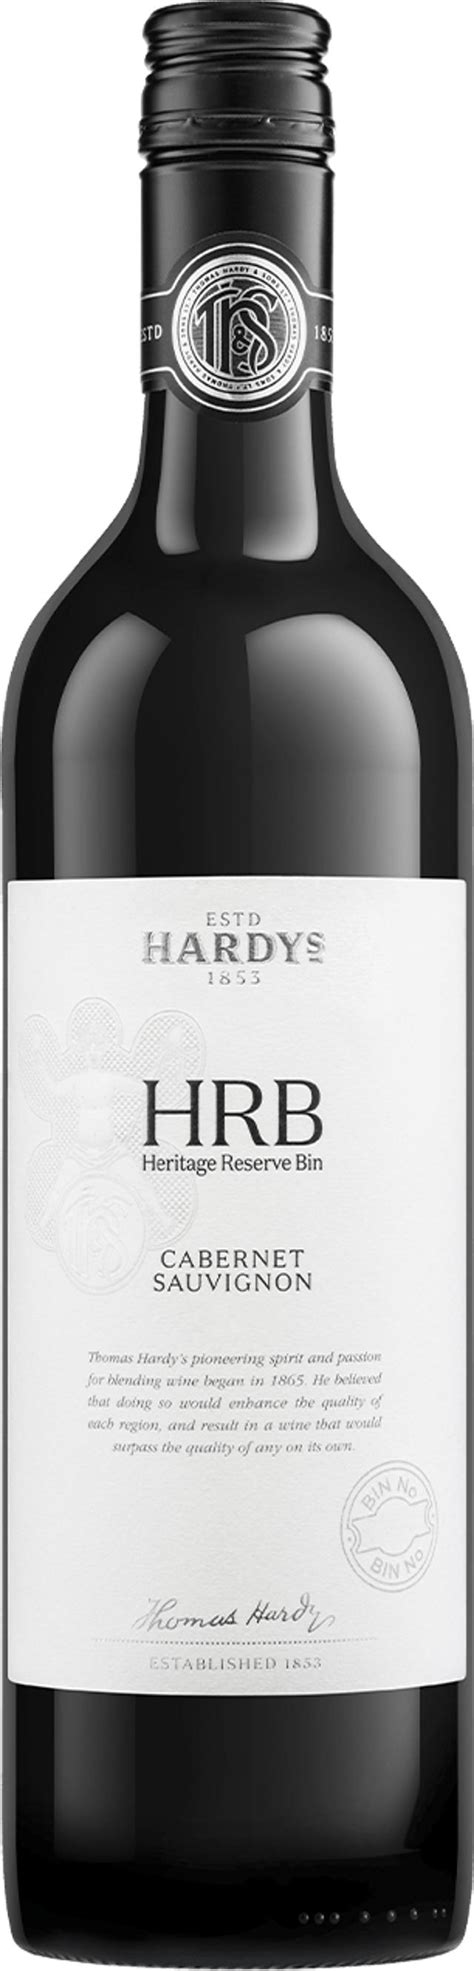 Hardys Hrb Heritage Reserve Bin Cabernet Sauvignon 2015 The Real Review